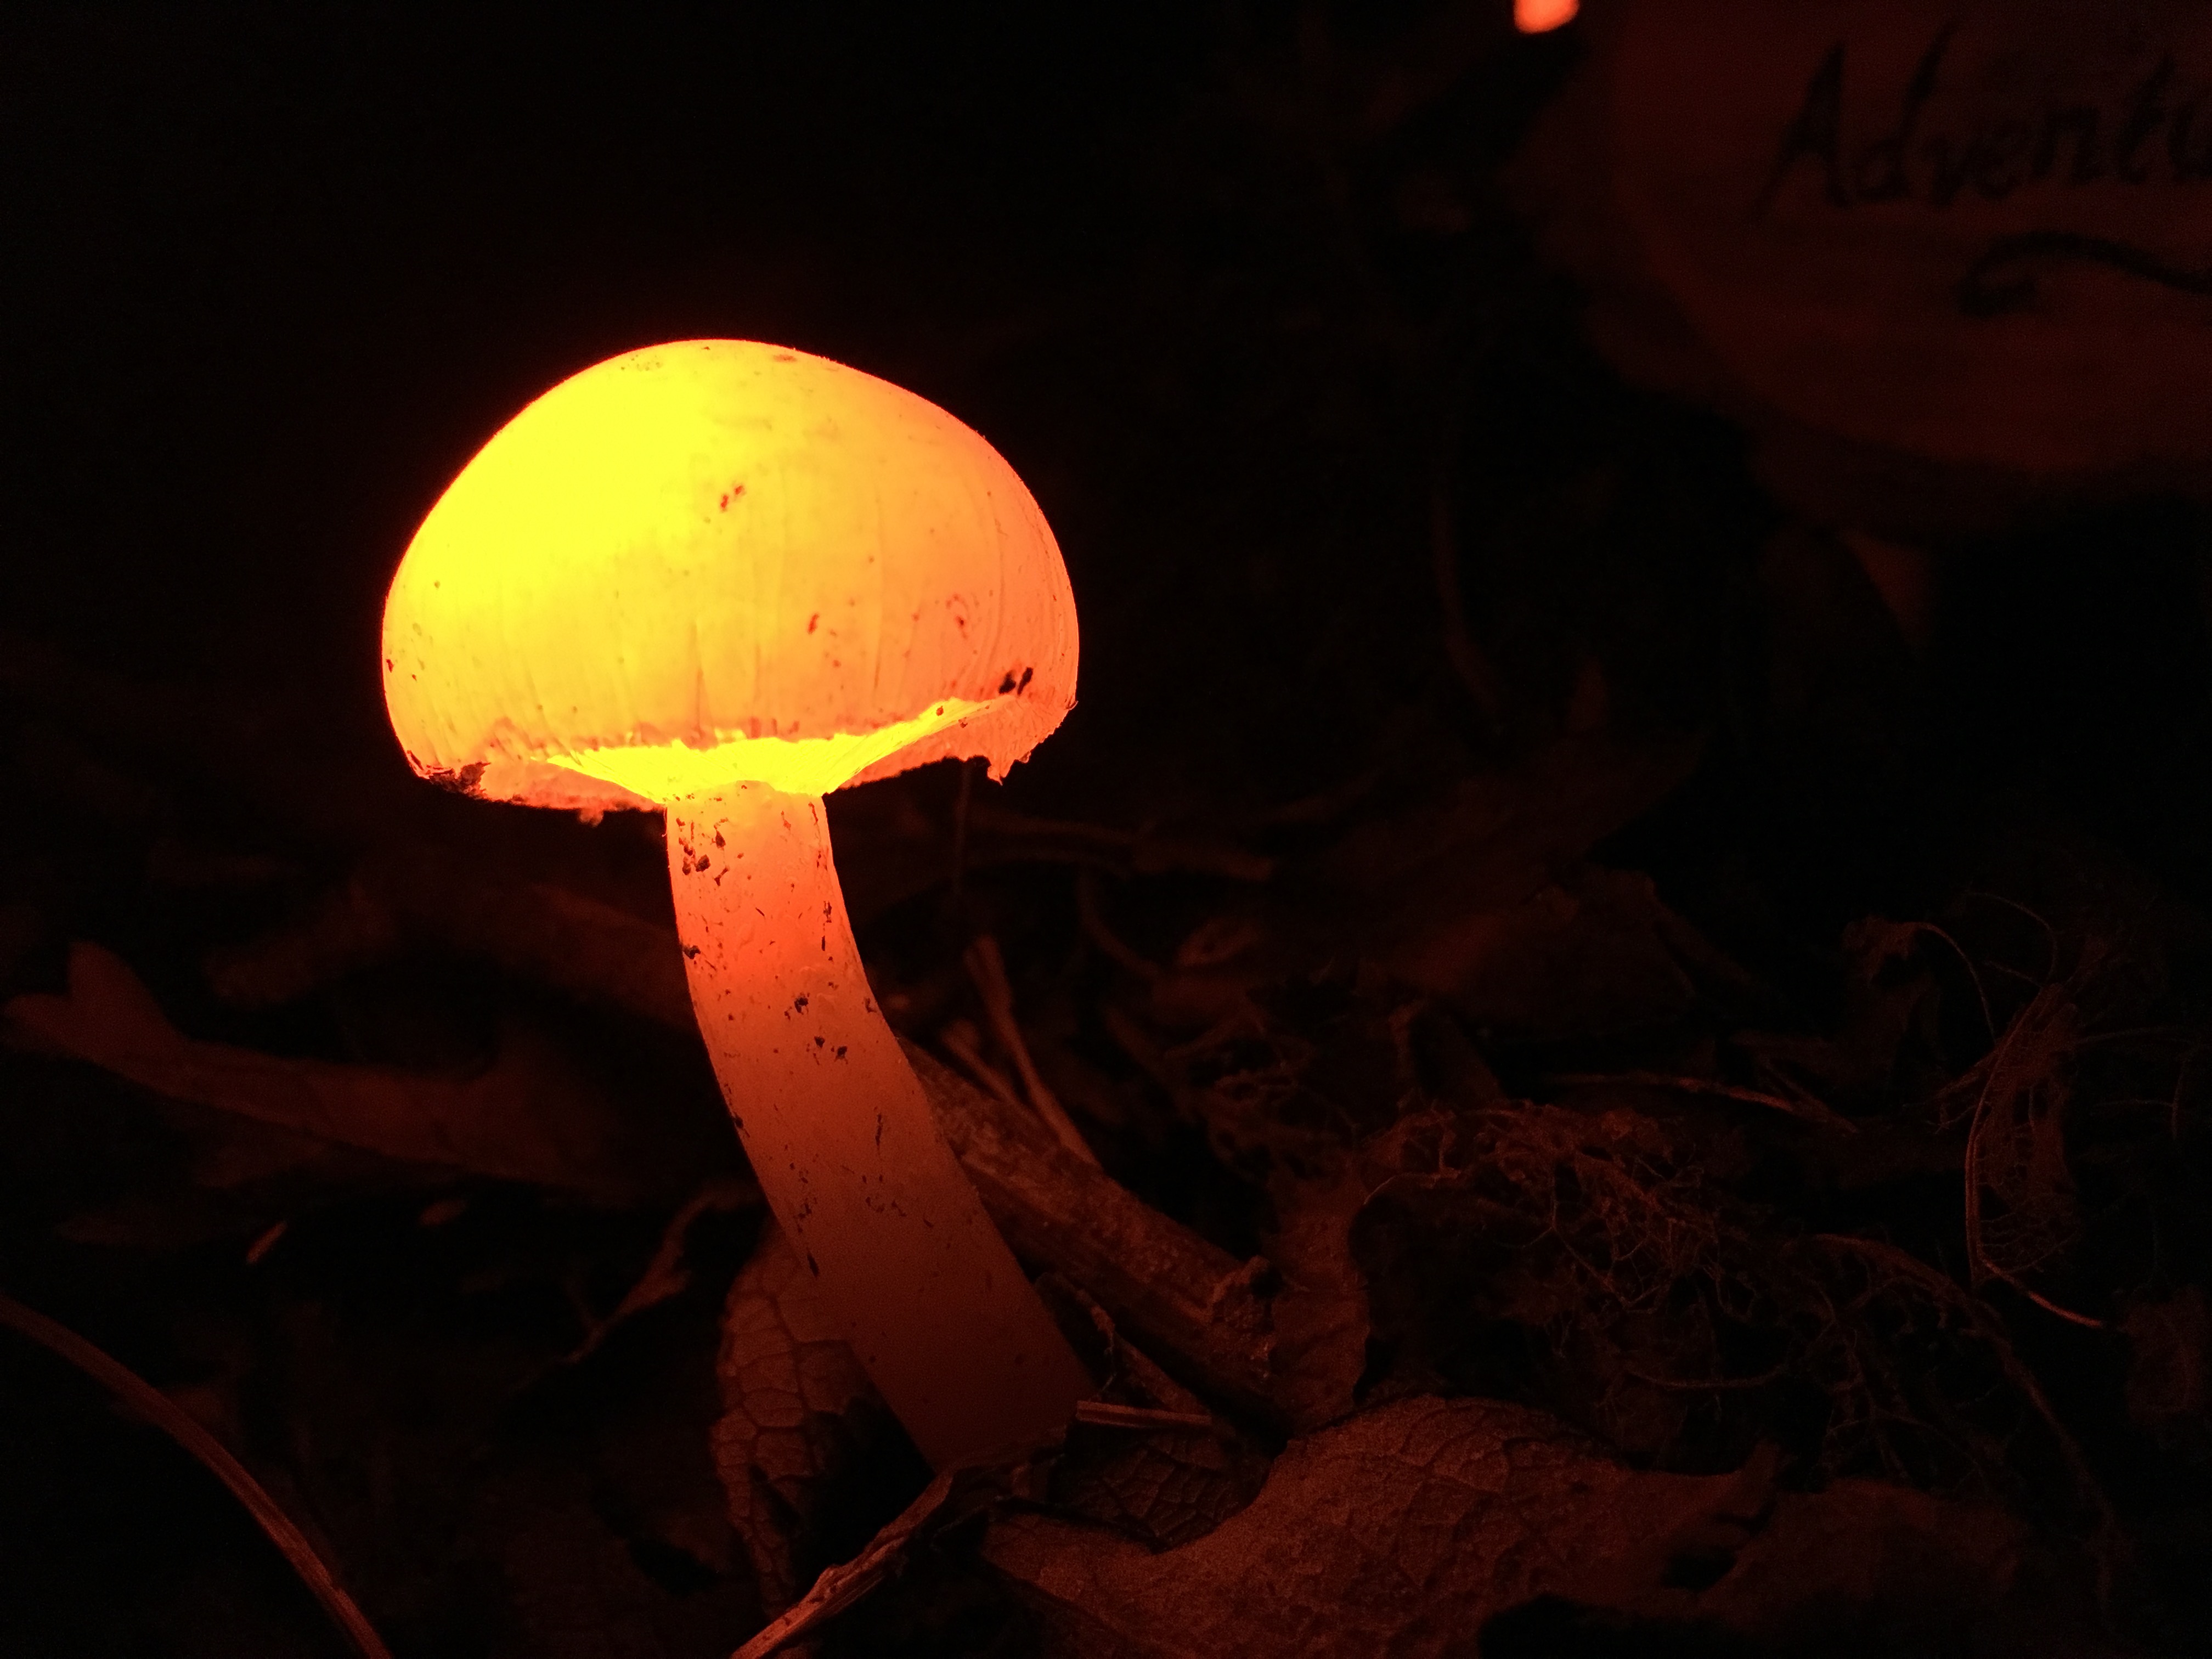 A mushroom glowing with bright orange light protrudes from leaves on the ground